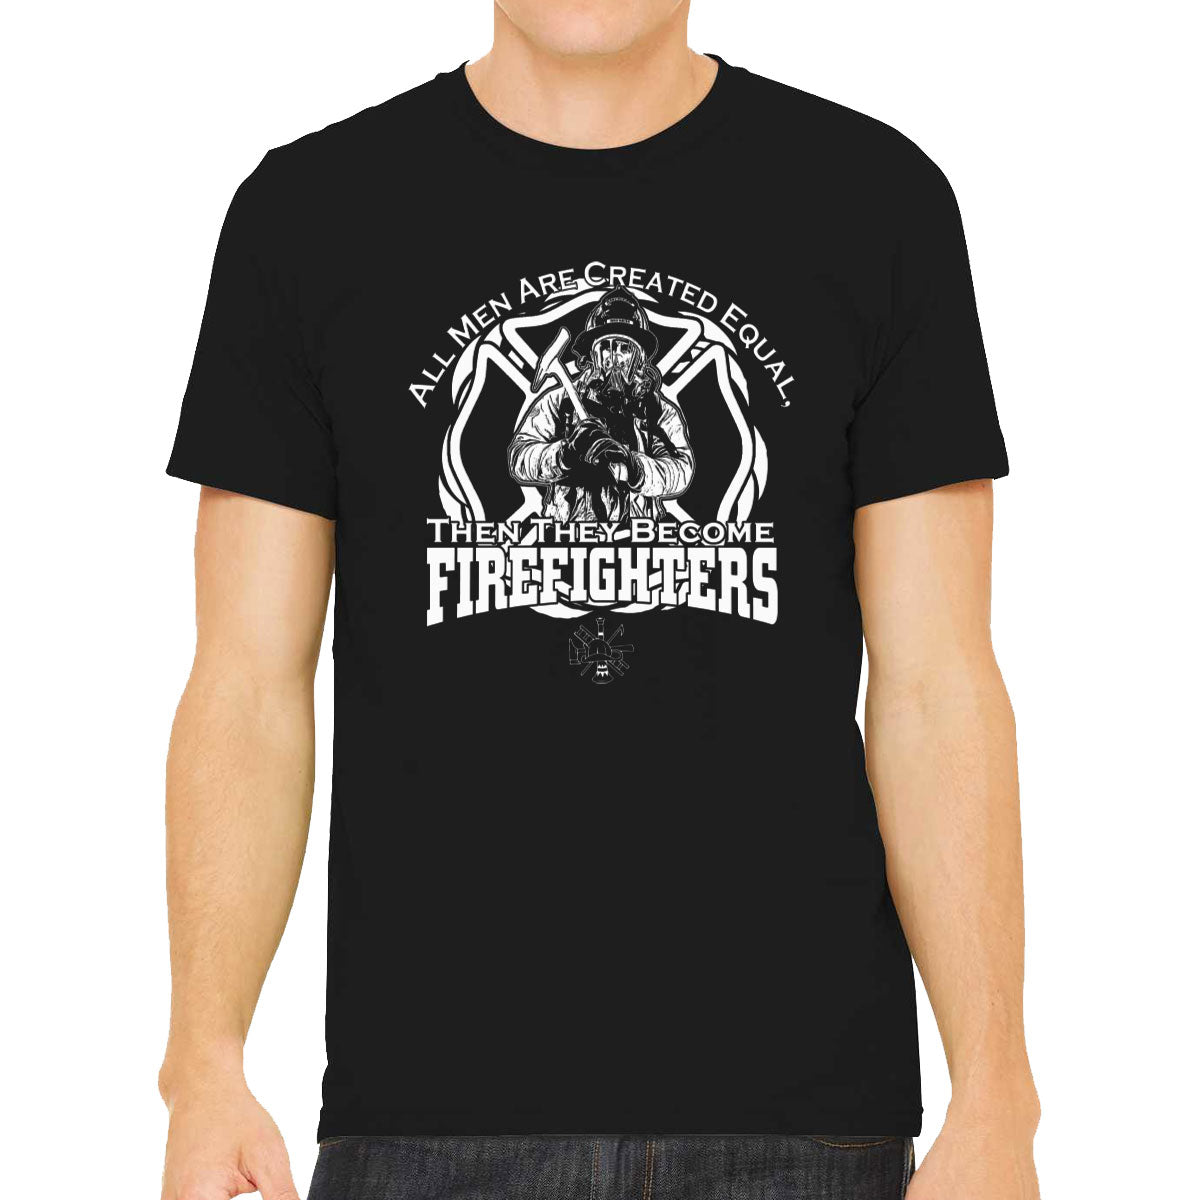 All Men Are Created Equal Then They Become Firefighters Men's T-shirt